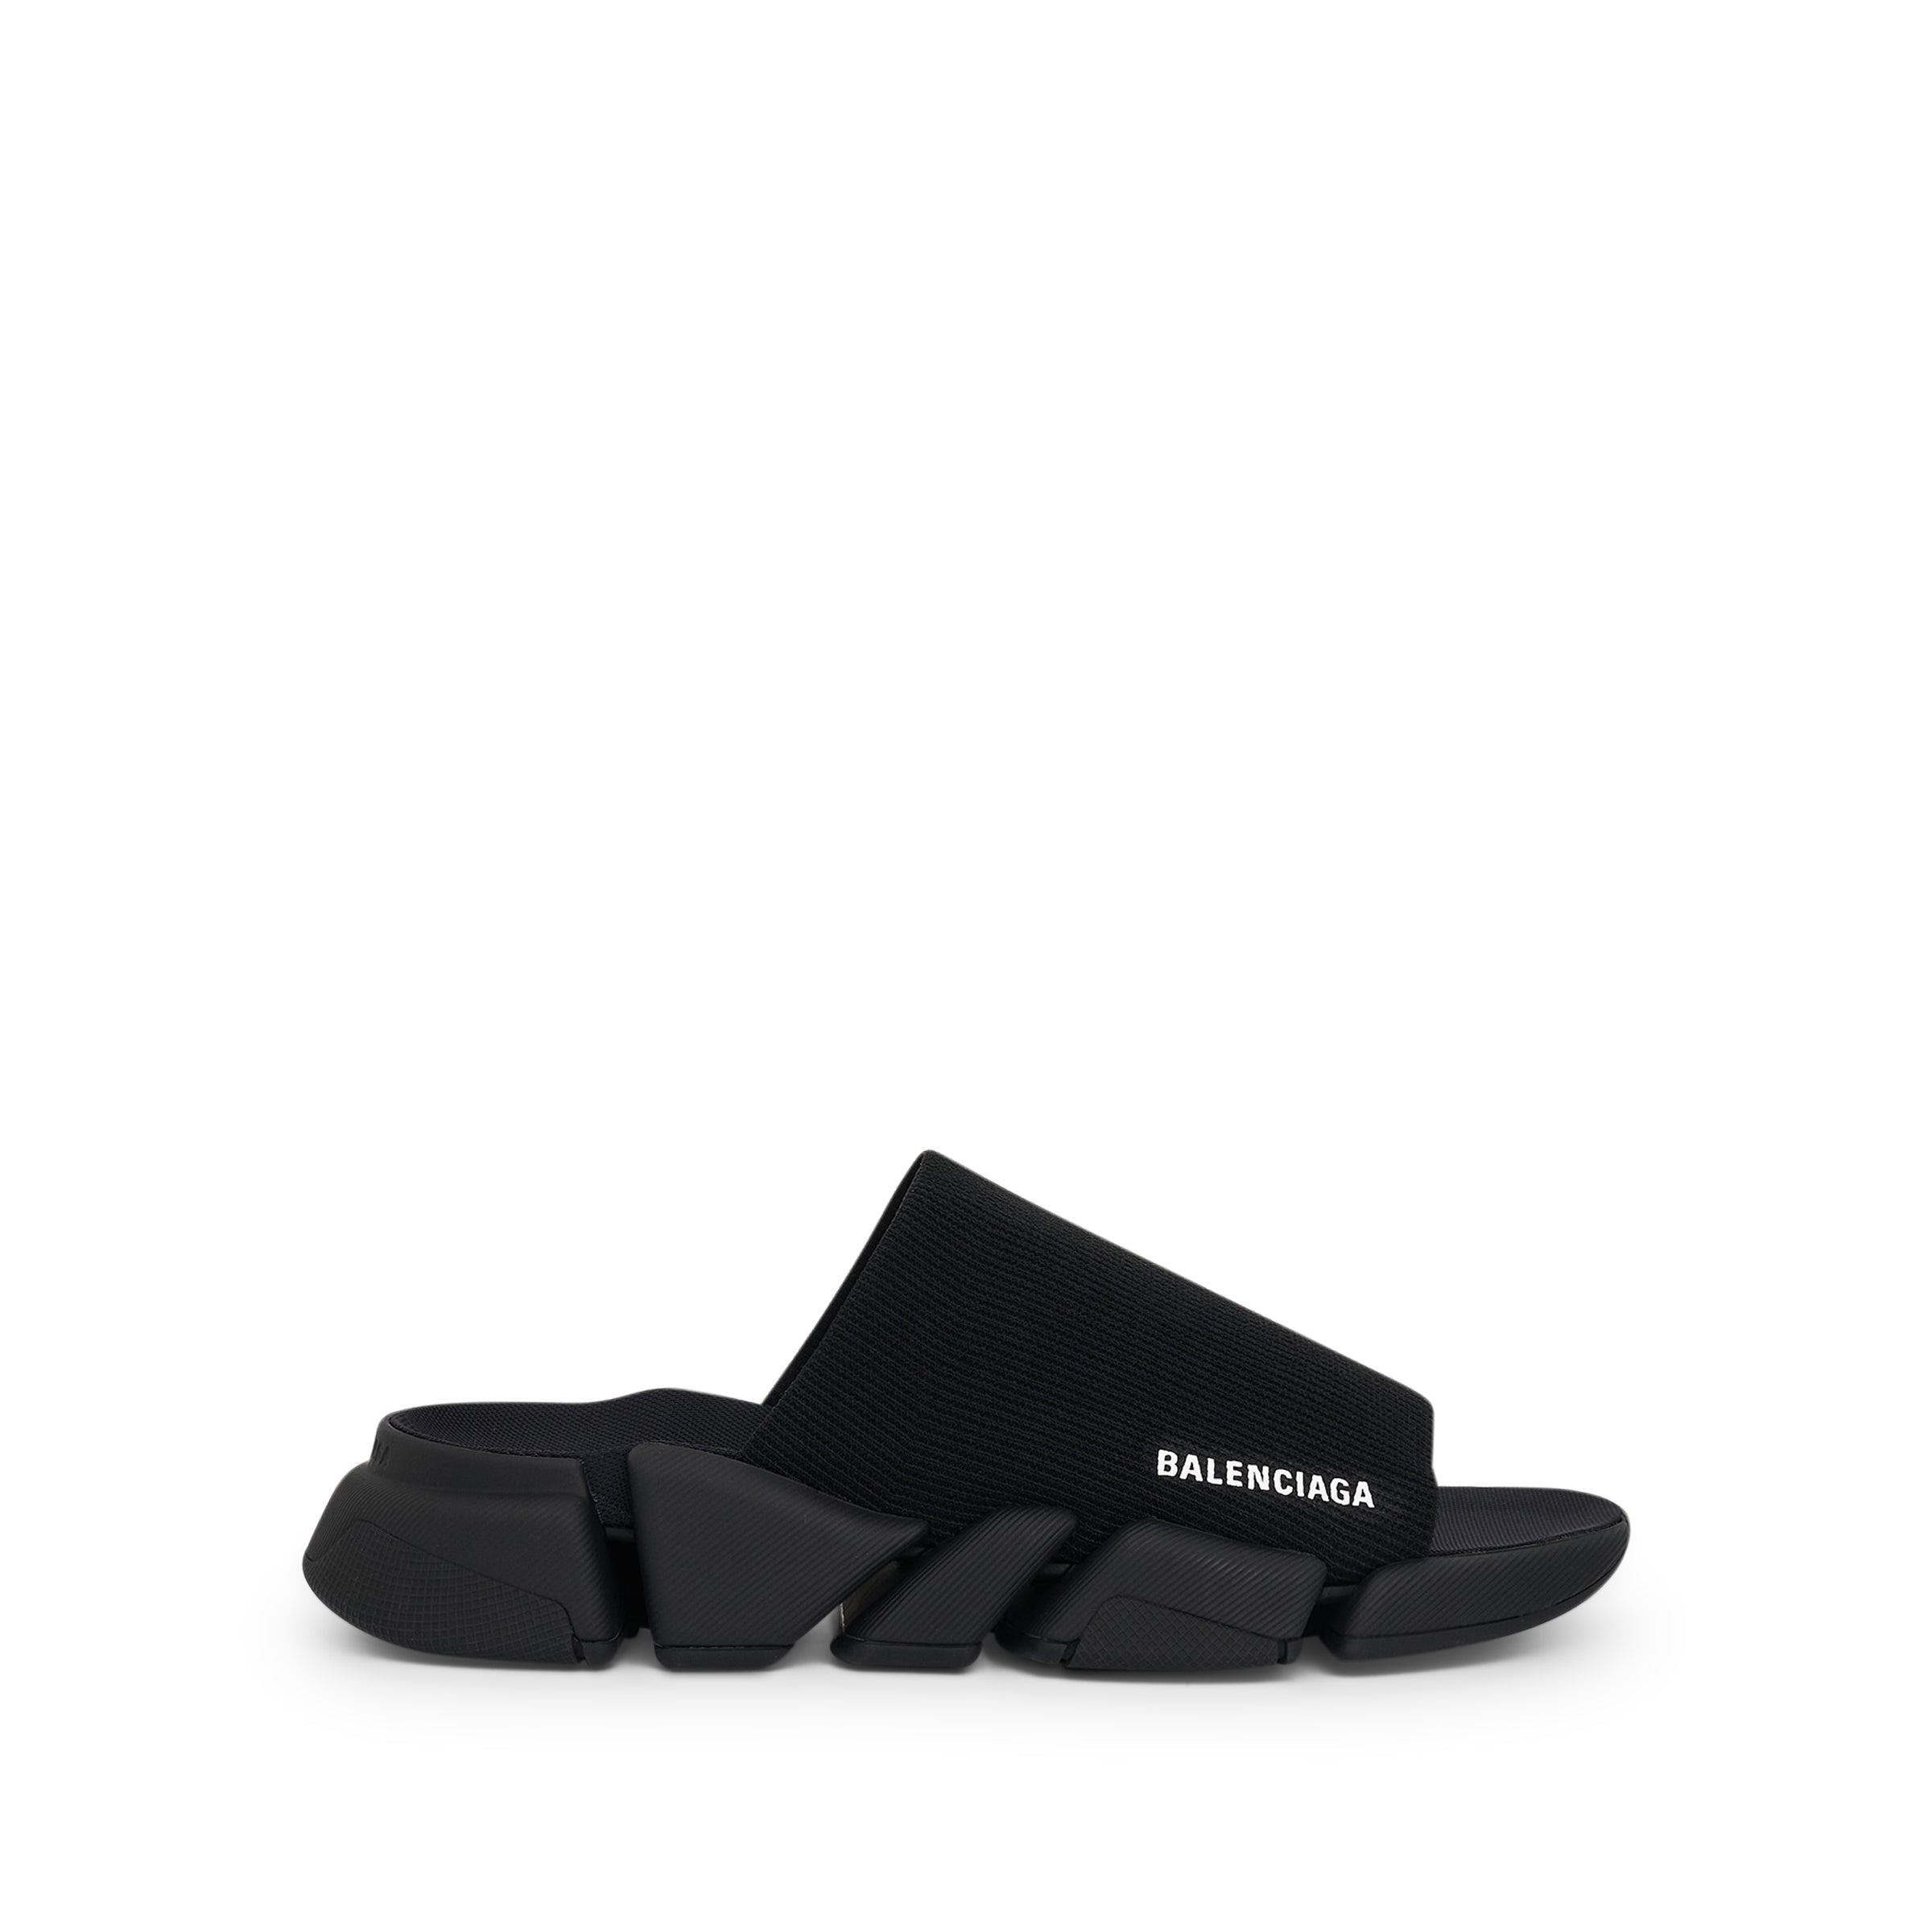 Speed 2.0 Recycled Knit Slide in Black - 1